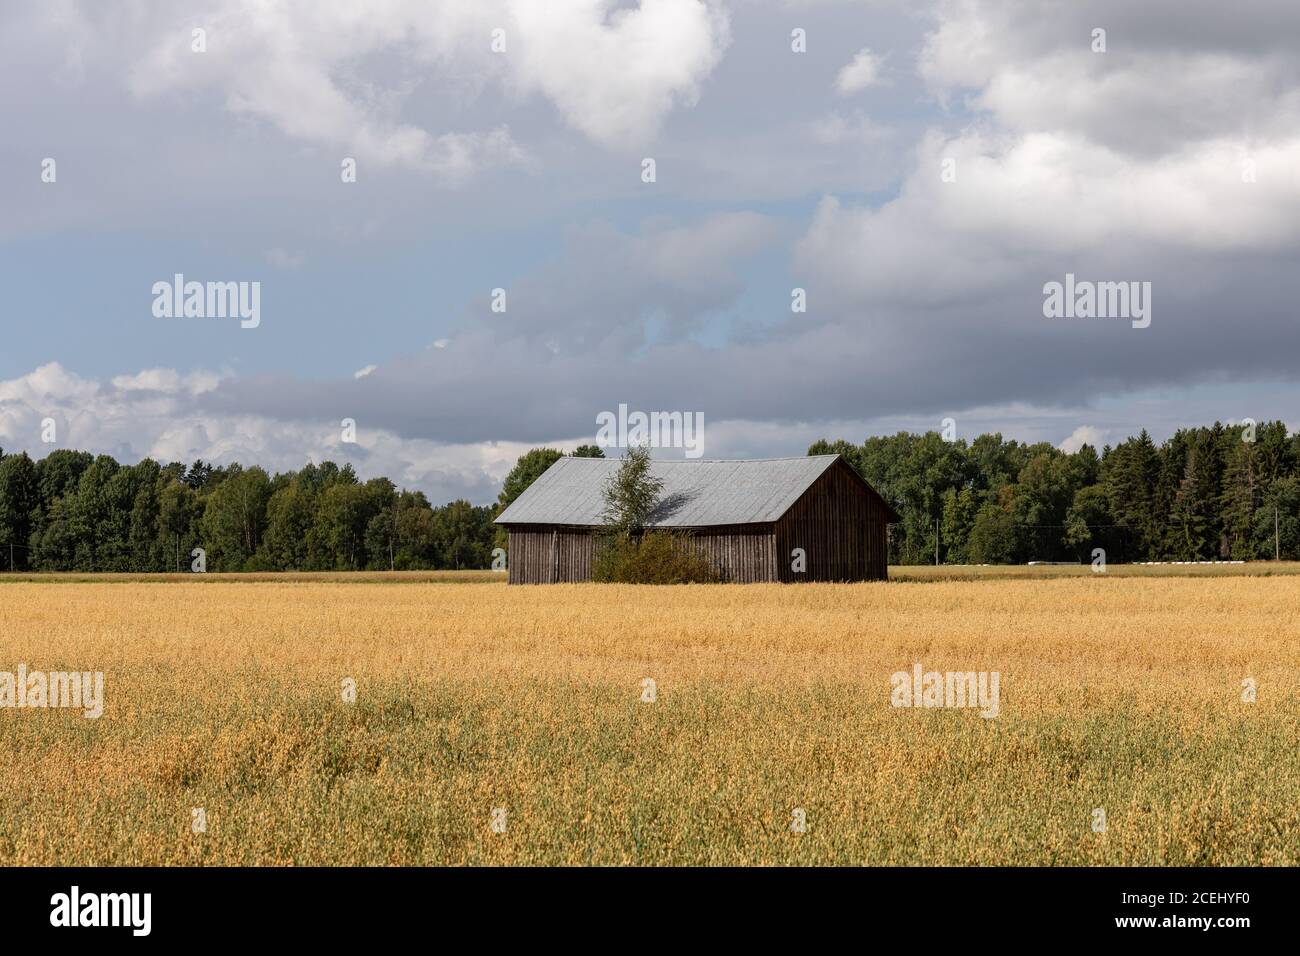 Old barn or granary in the middle of oat field in rural countryside of Hauho, Finland Stock Photo